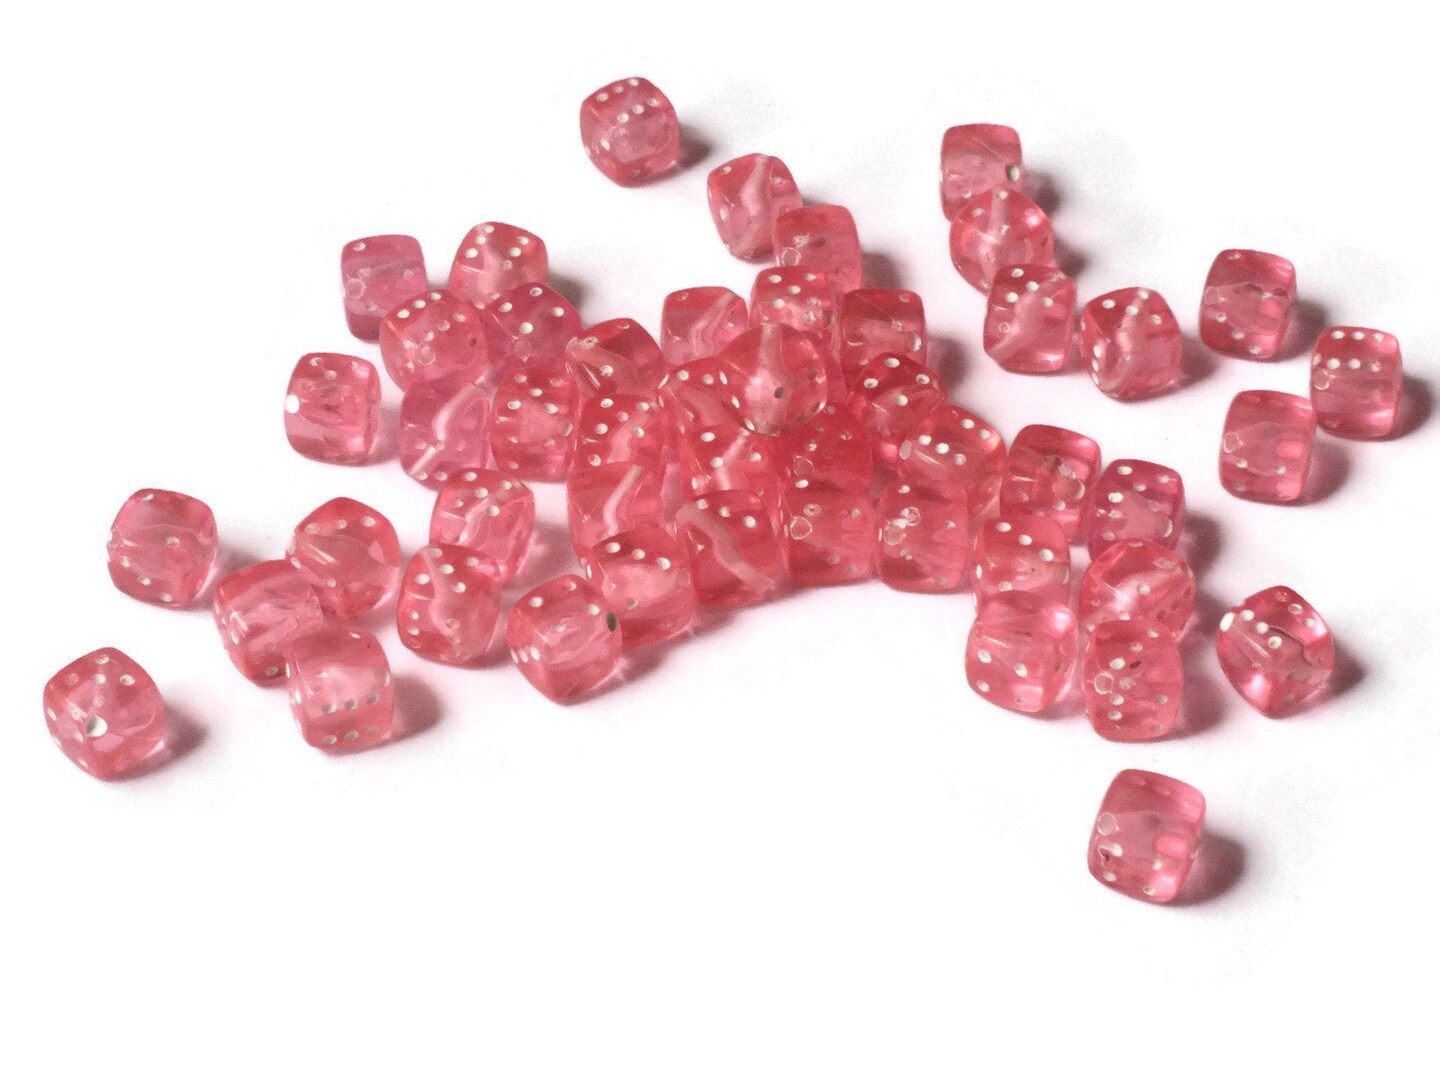 50 8mm Red Dice Beads - Acrylic Cube Beads by Smileyboy Beads | Michaels